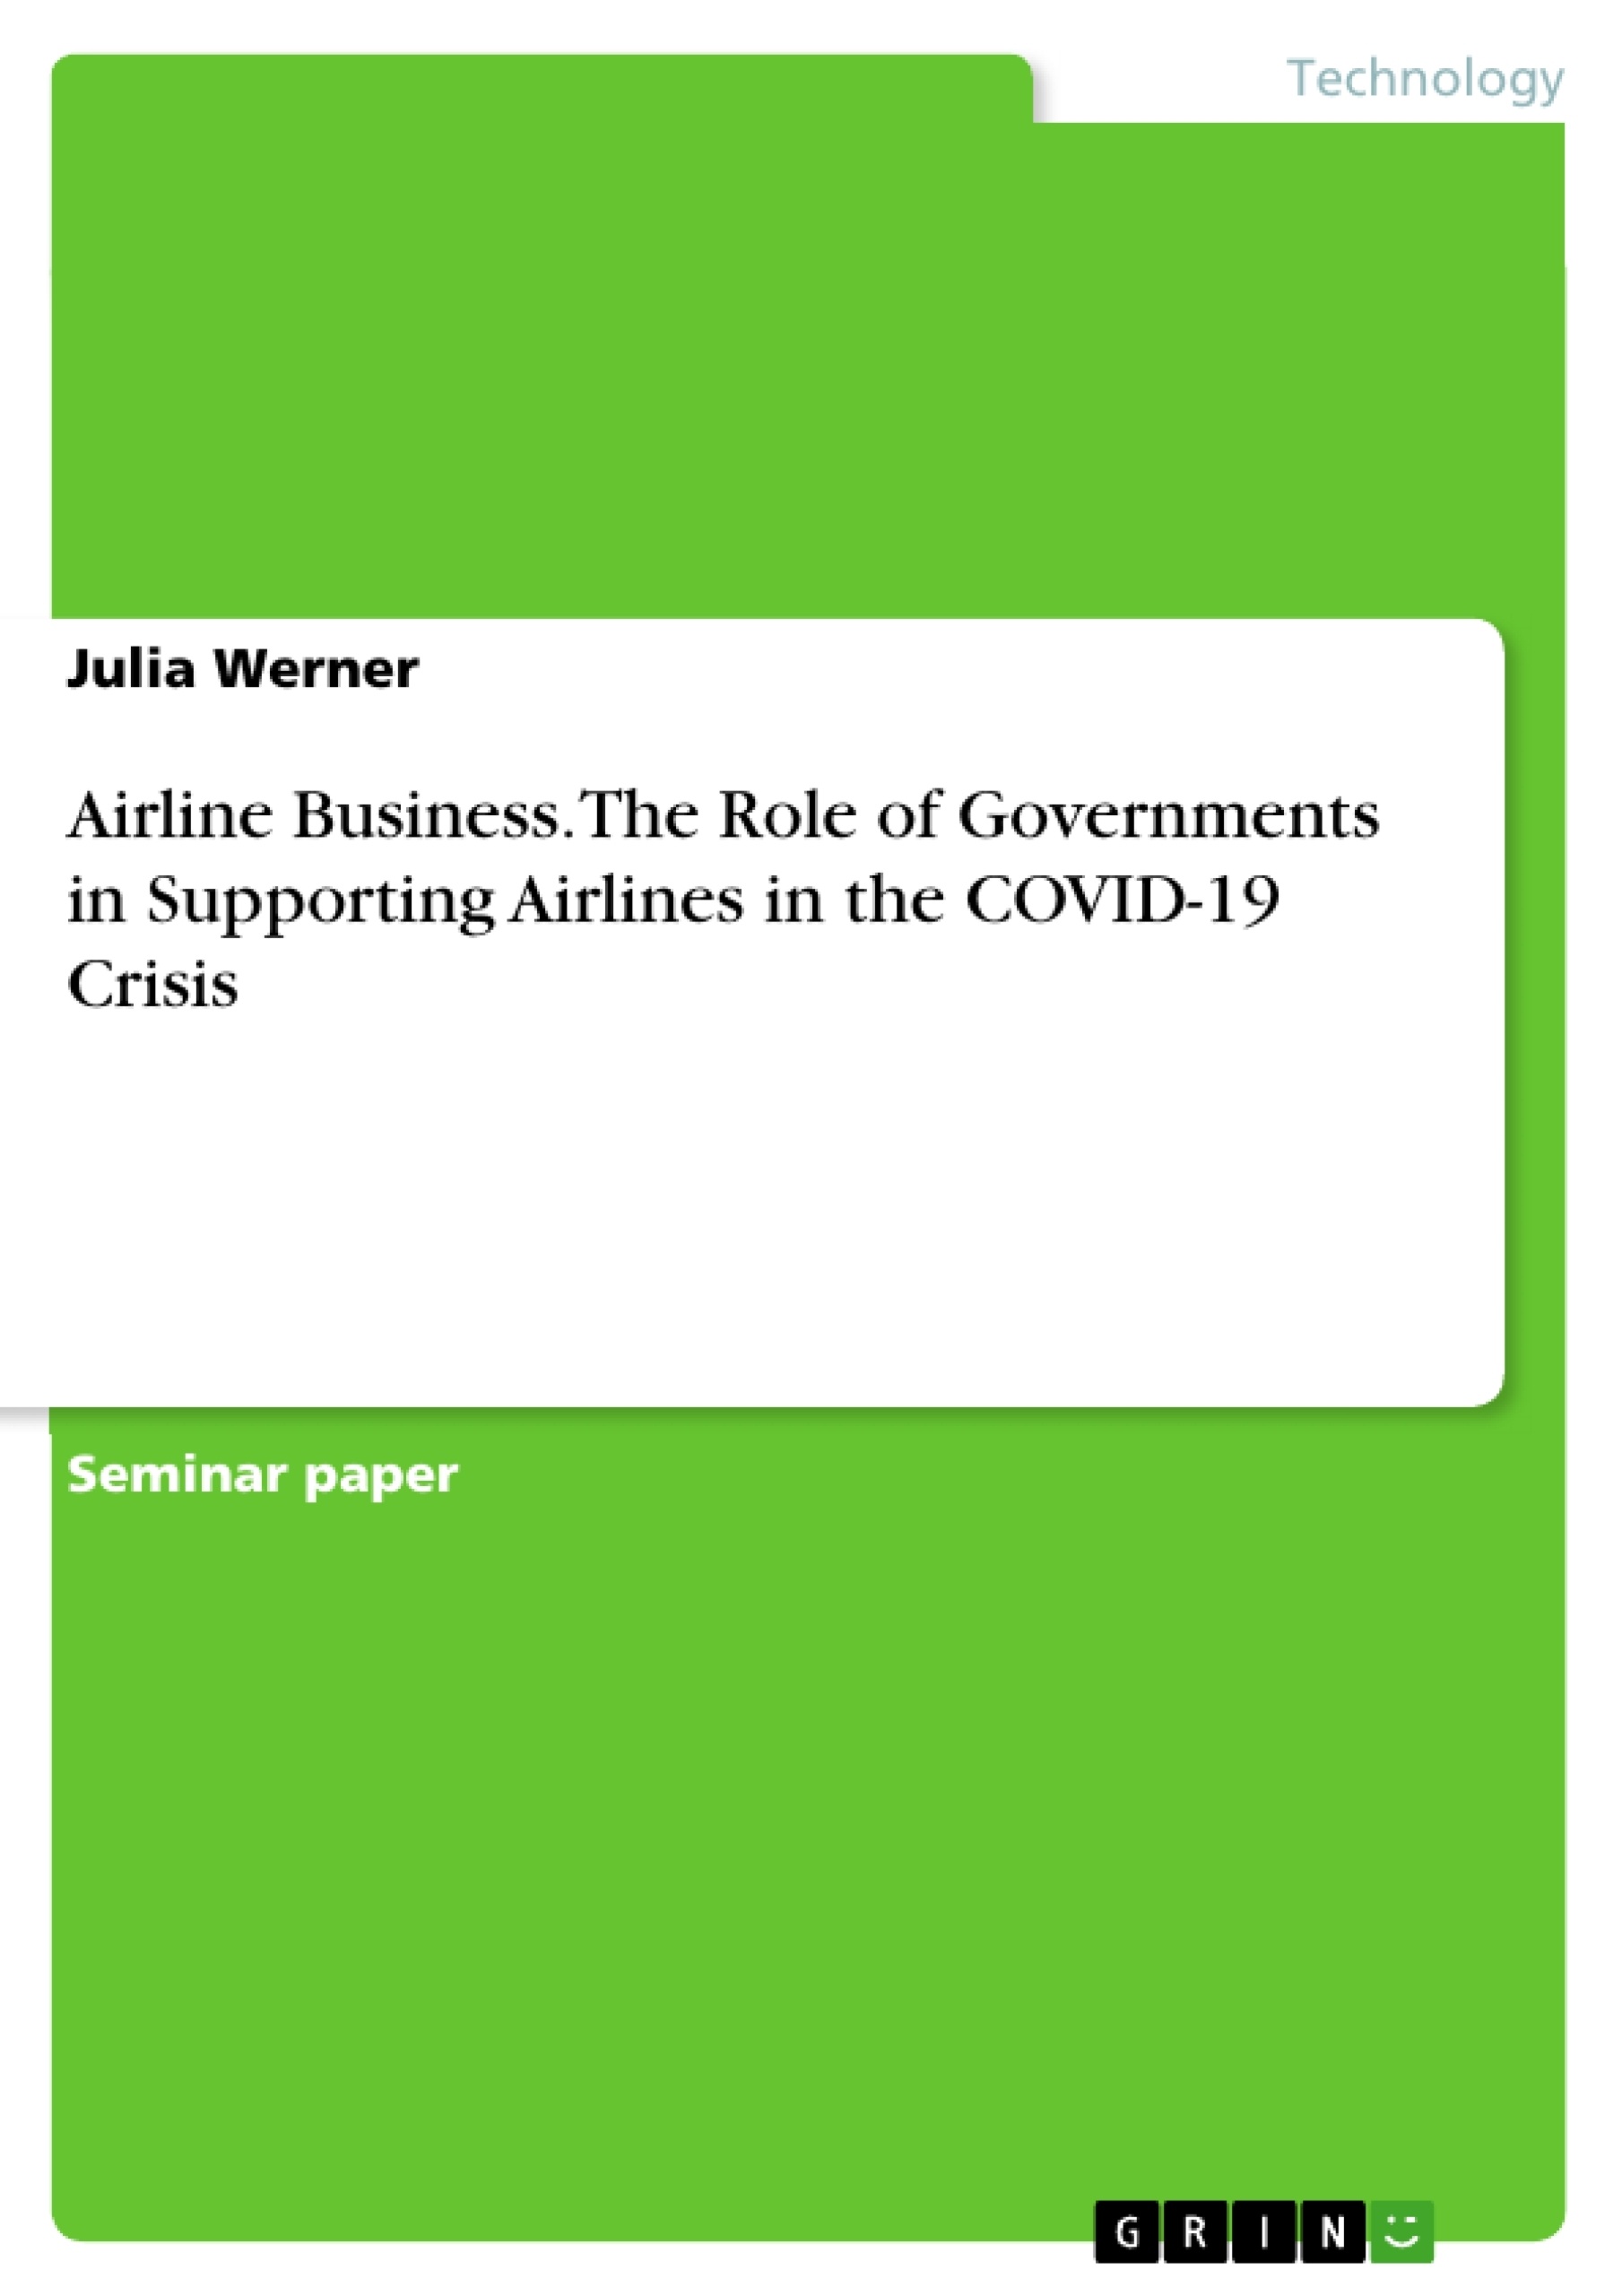 Title: Airline Business. The Role of Governments in Supporting Airlines in the COVID-19 Crisis